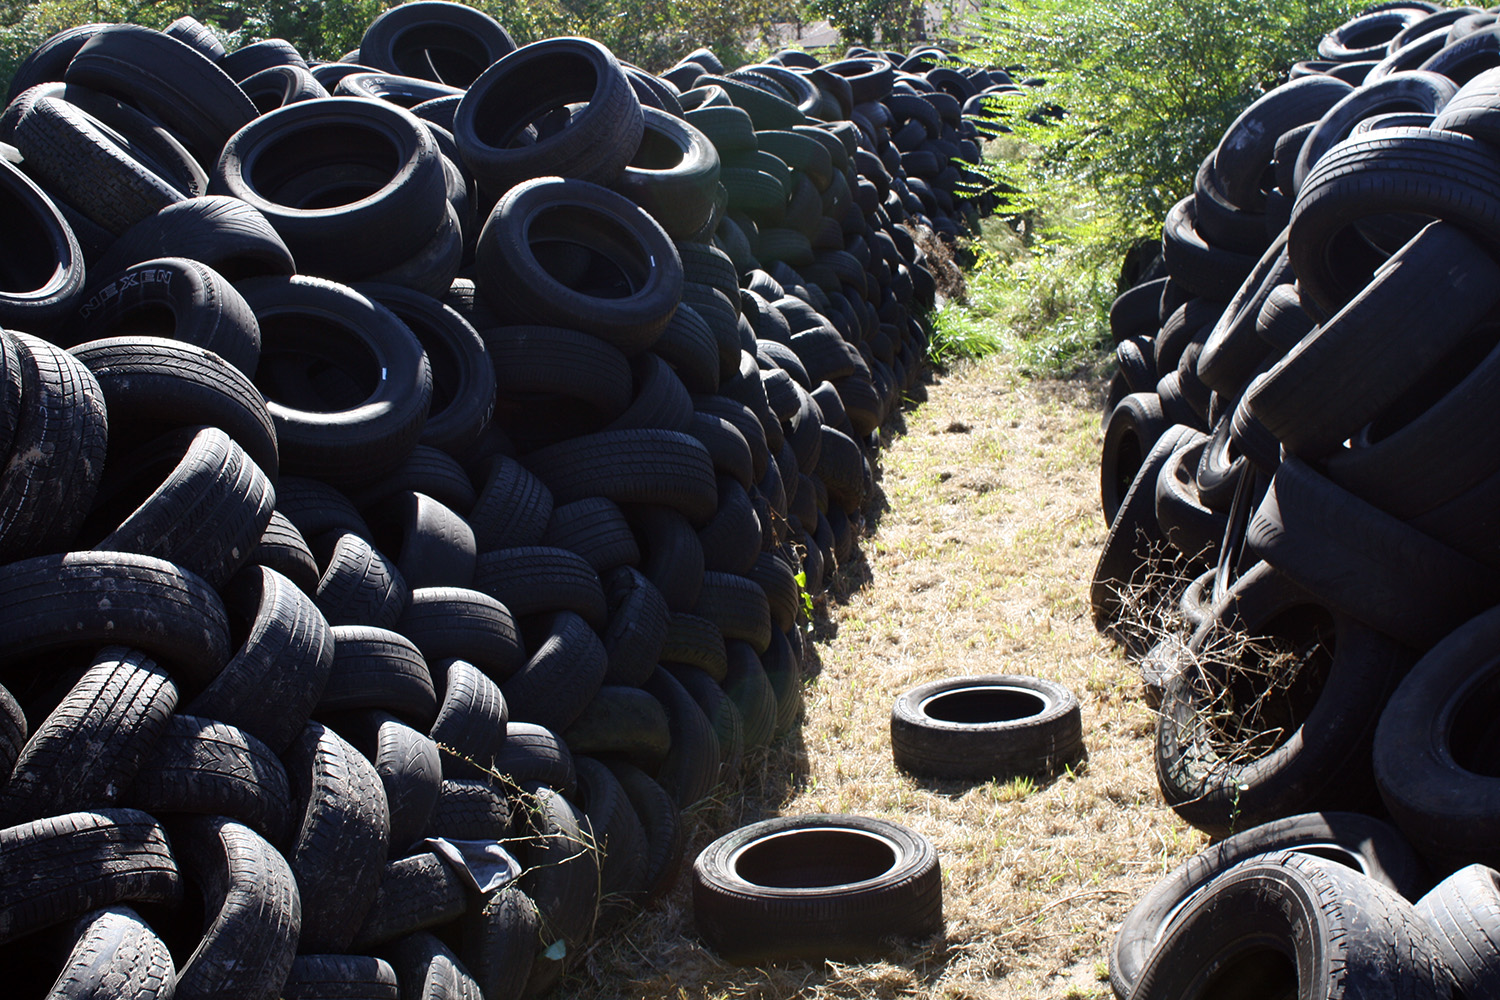 An estimated 20,000 waste tires were removed from B&S Tires